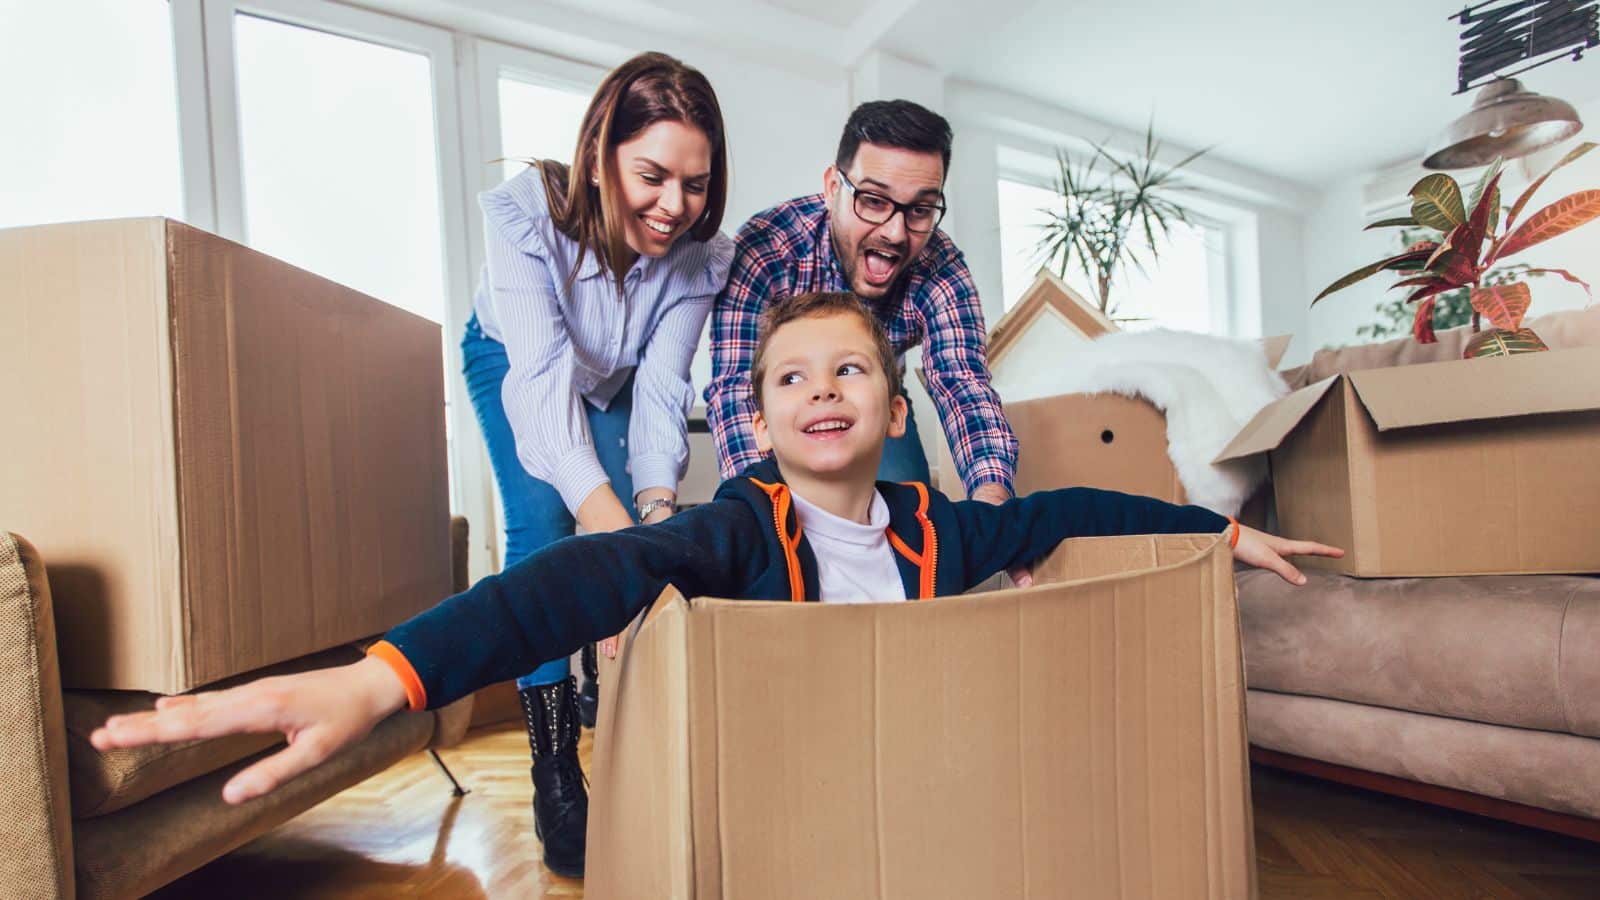 A family packing moving boxes and playing during the process.